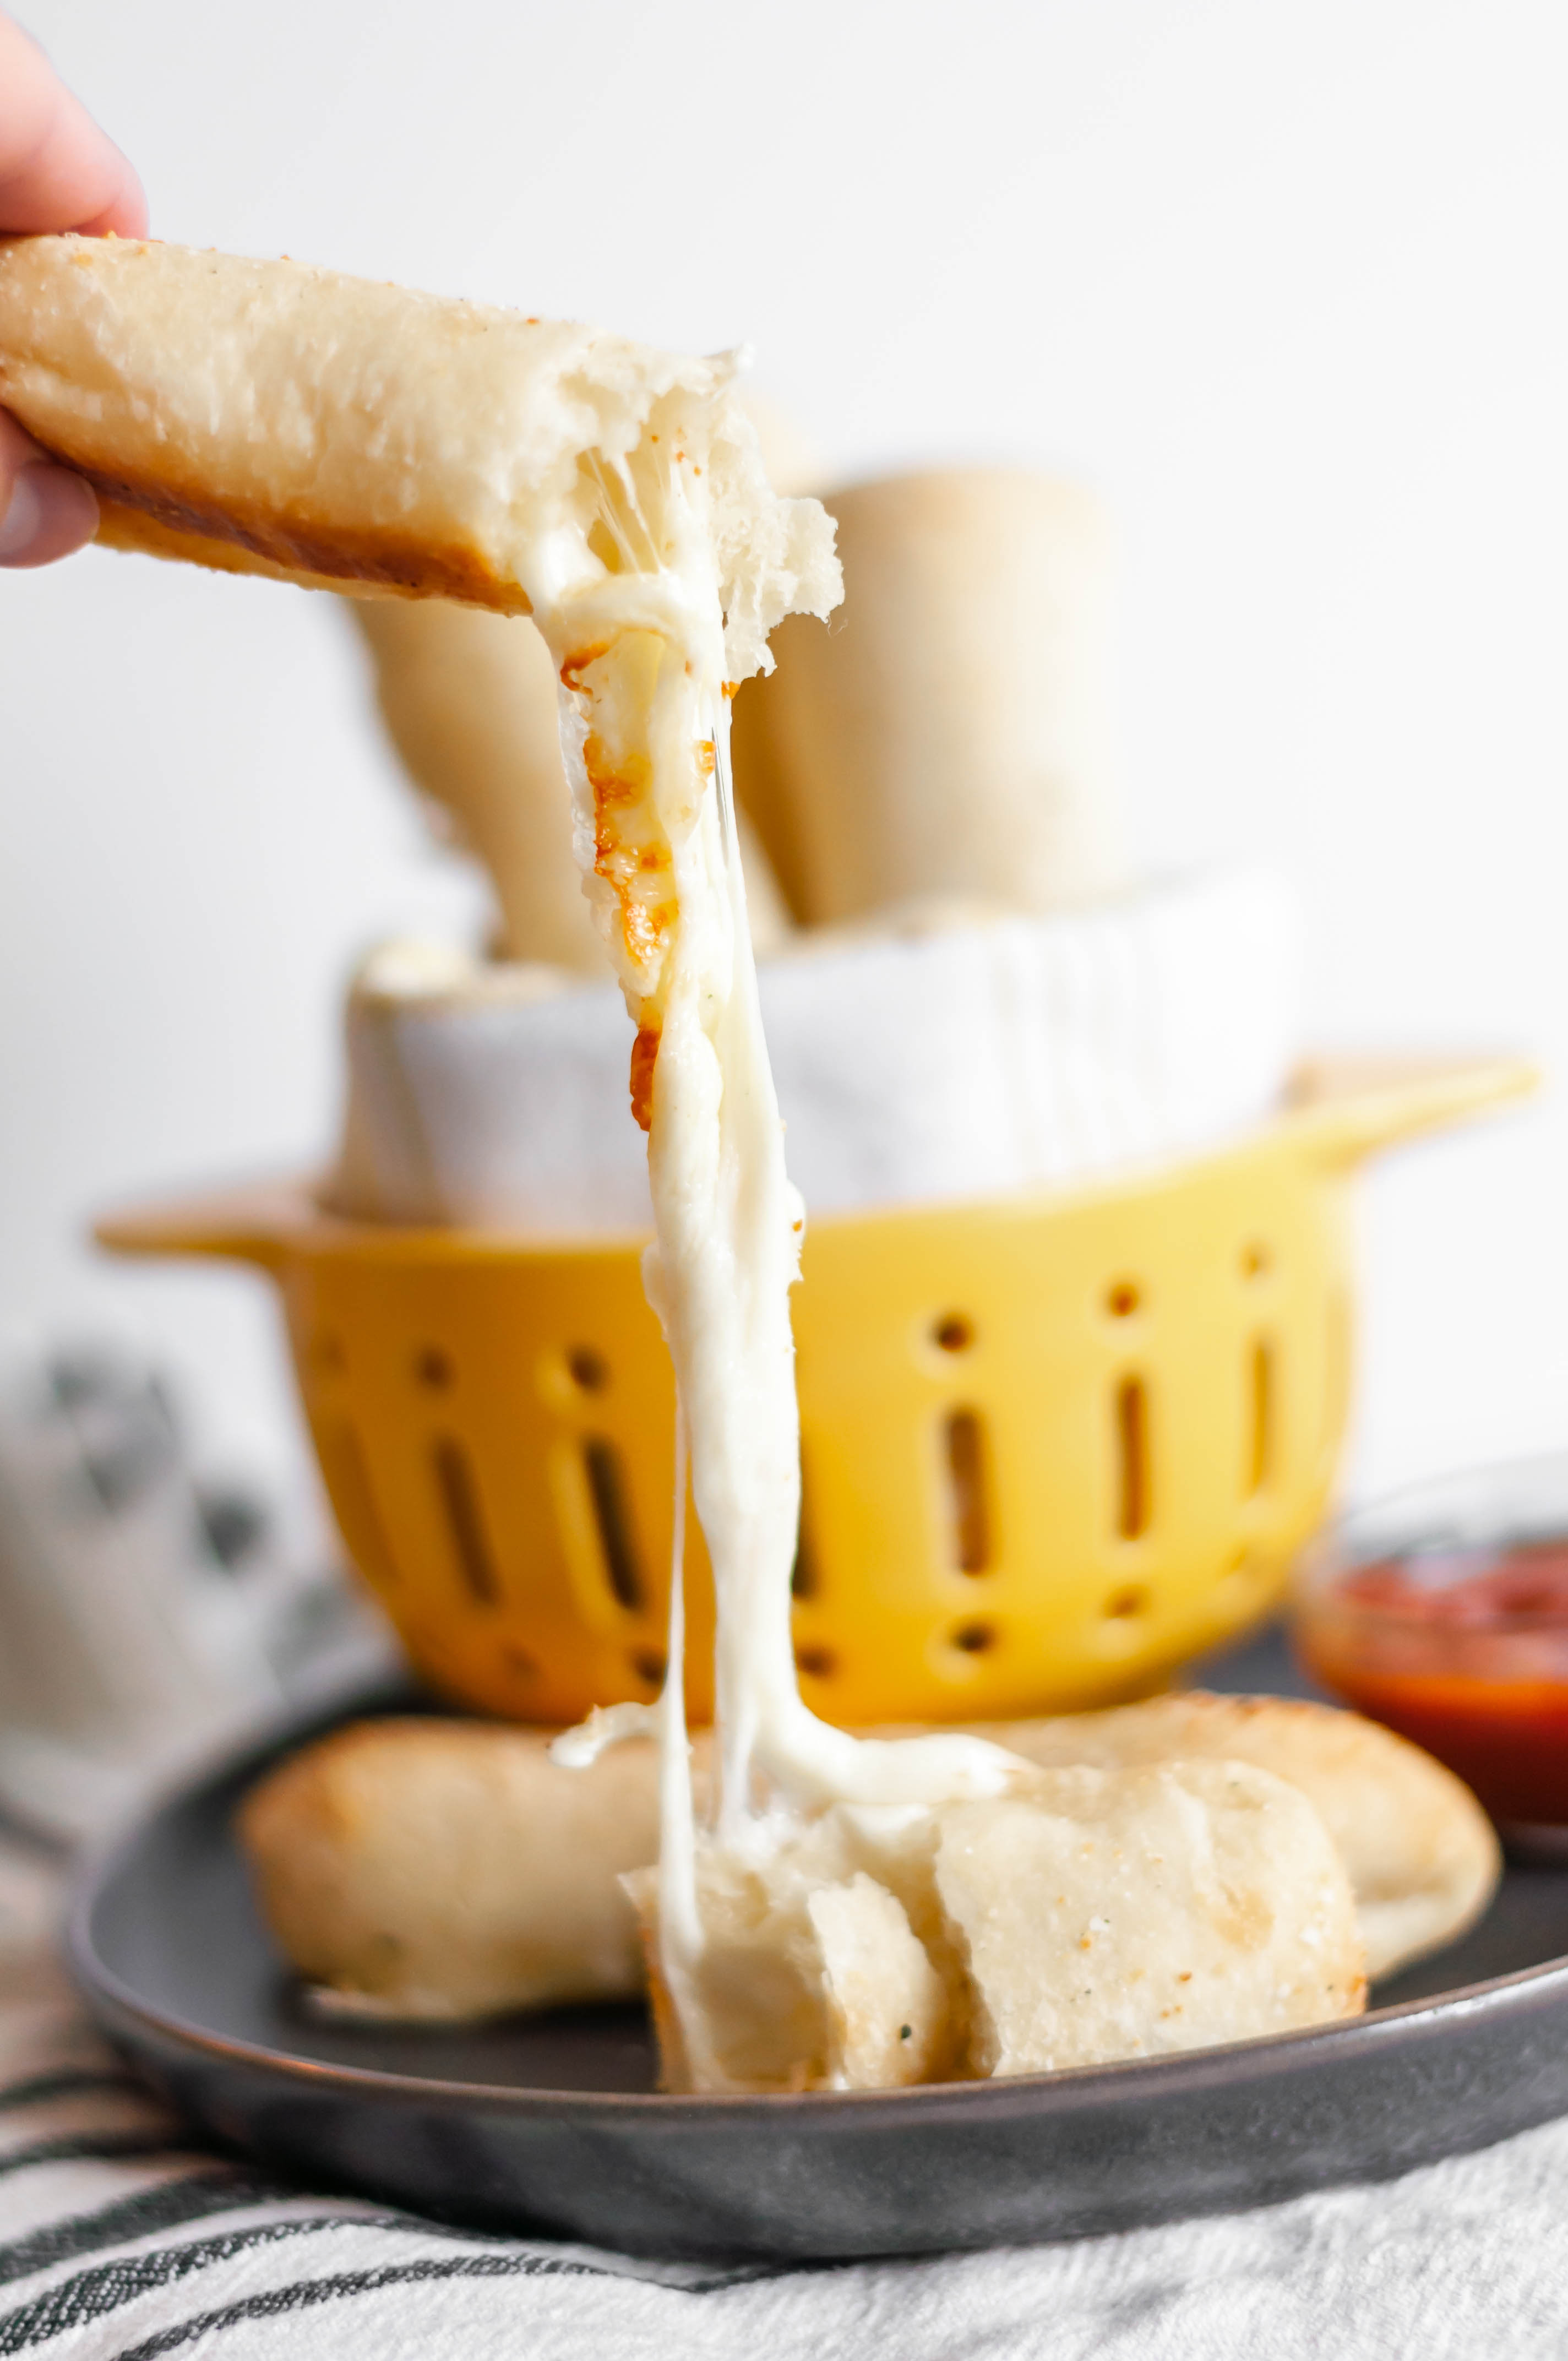 Cheese Stuffed Breadsticks are a super simple side for your soup or pasta this fall. Only 4 ingredients and less than 30 minutes for these ooey gooey cheese breadsticks.